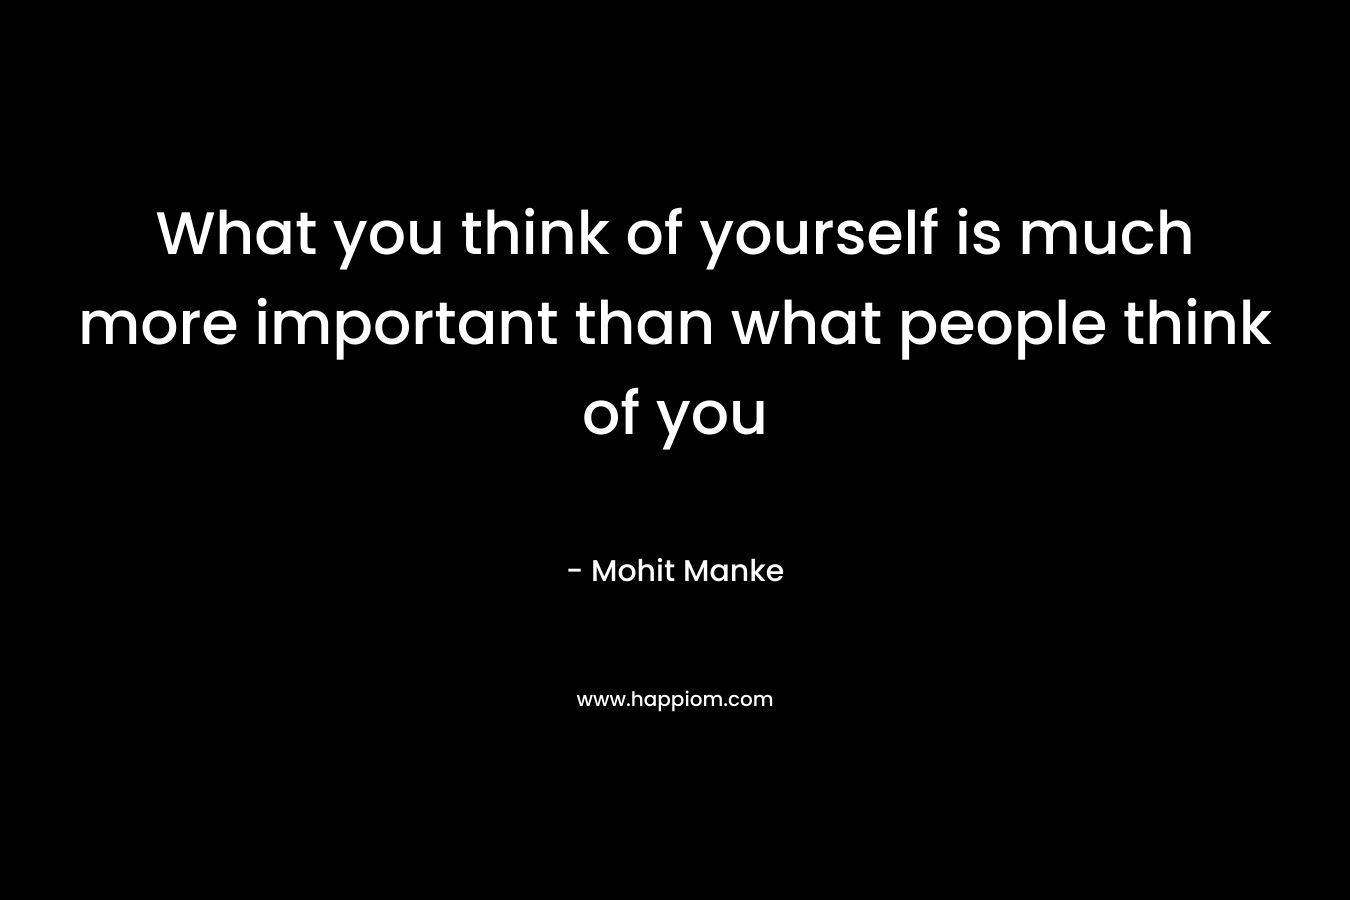 What you think of yourself is much more important than what people think of you